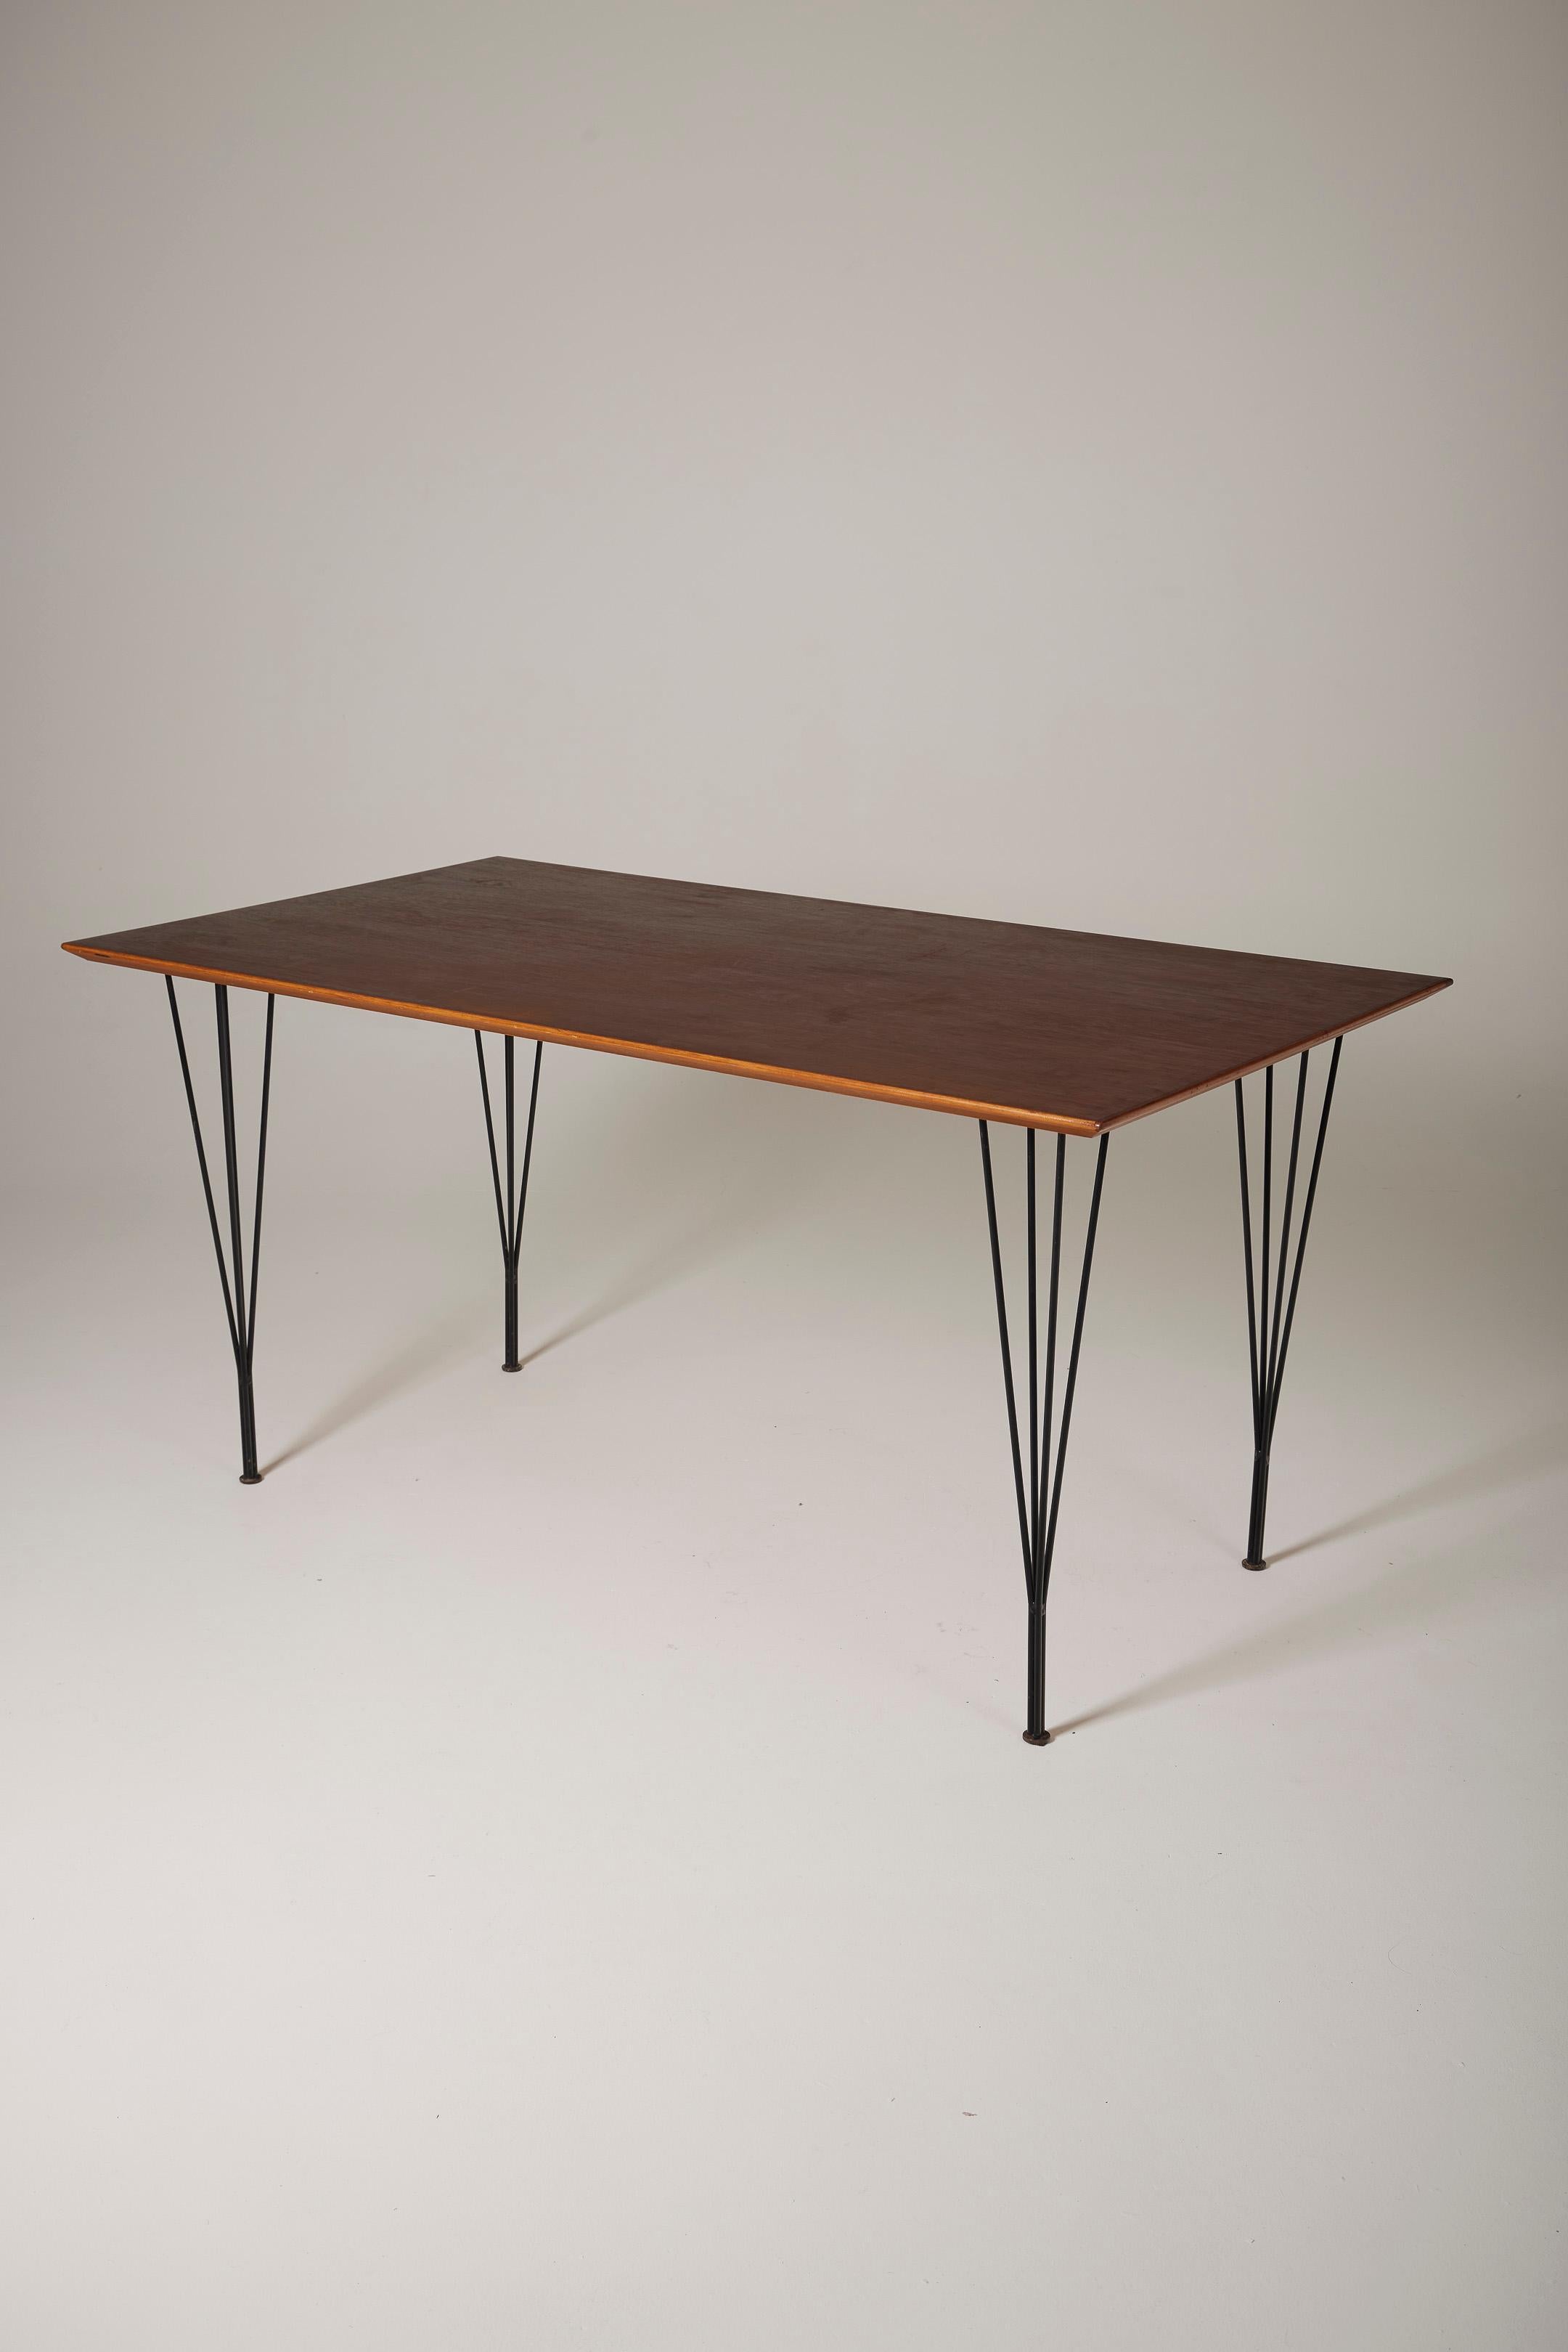 Danish dining table from the 1960s consisting of a teak tabletop and black tubular legs. Very good condition.
DV680